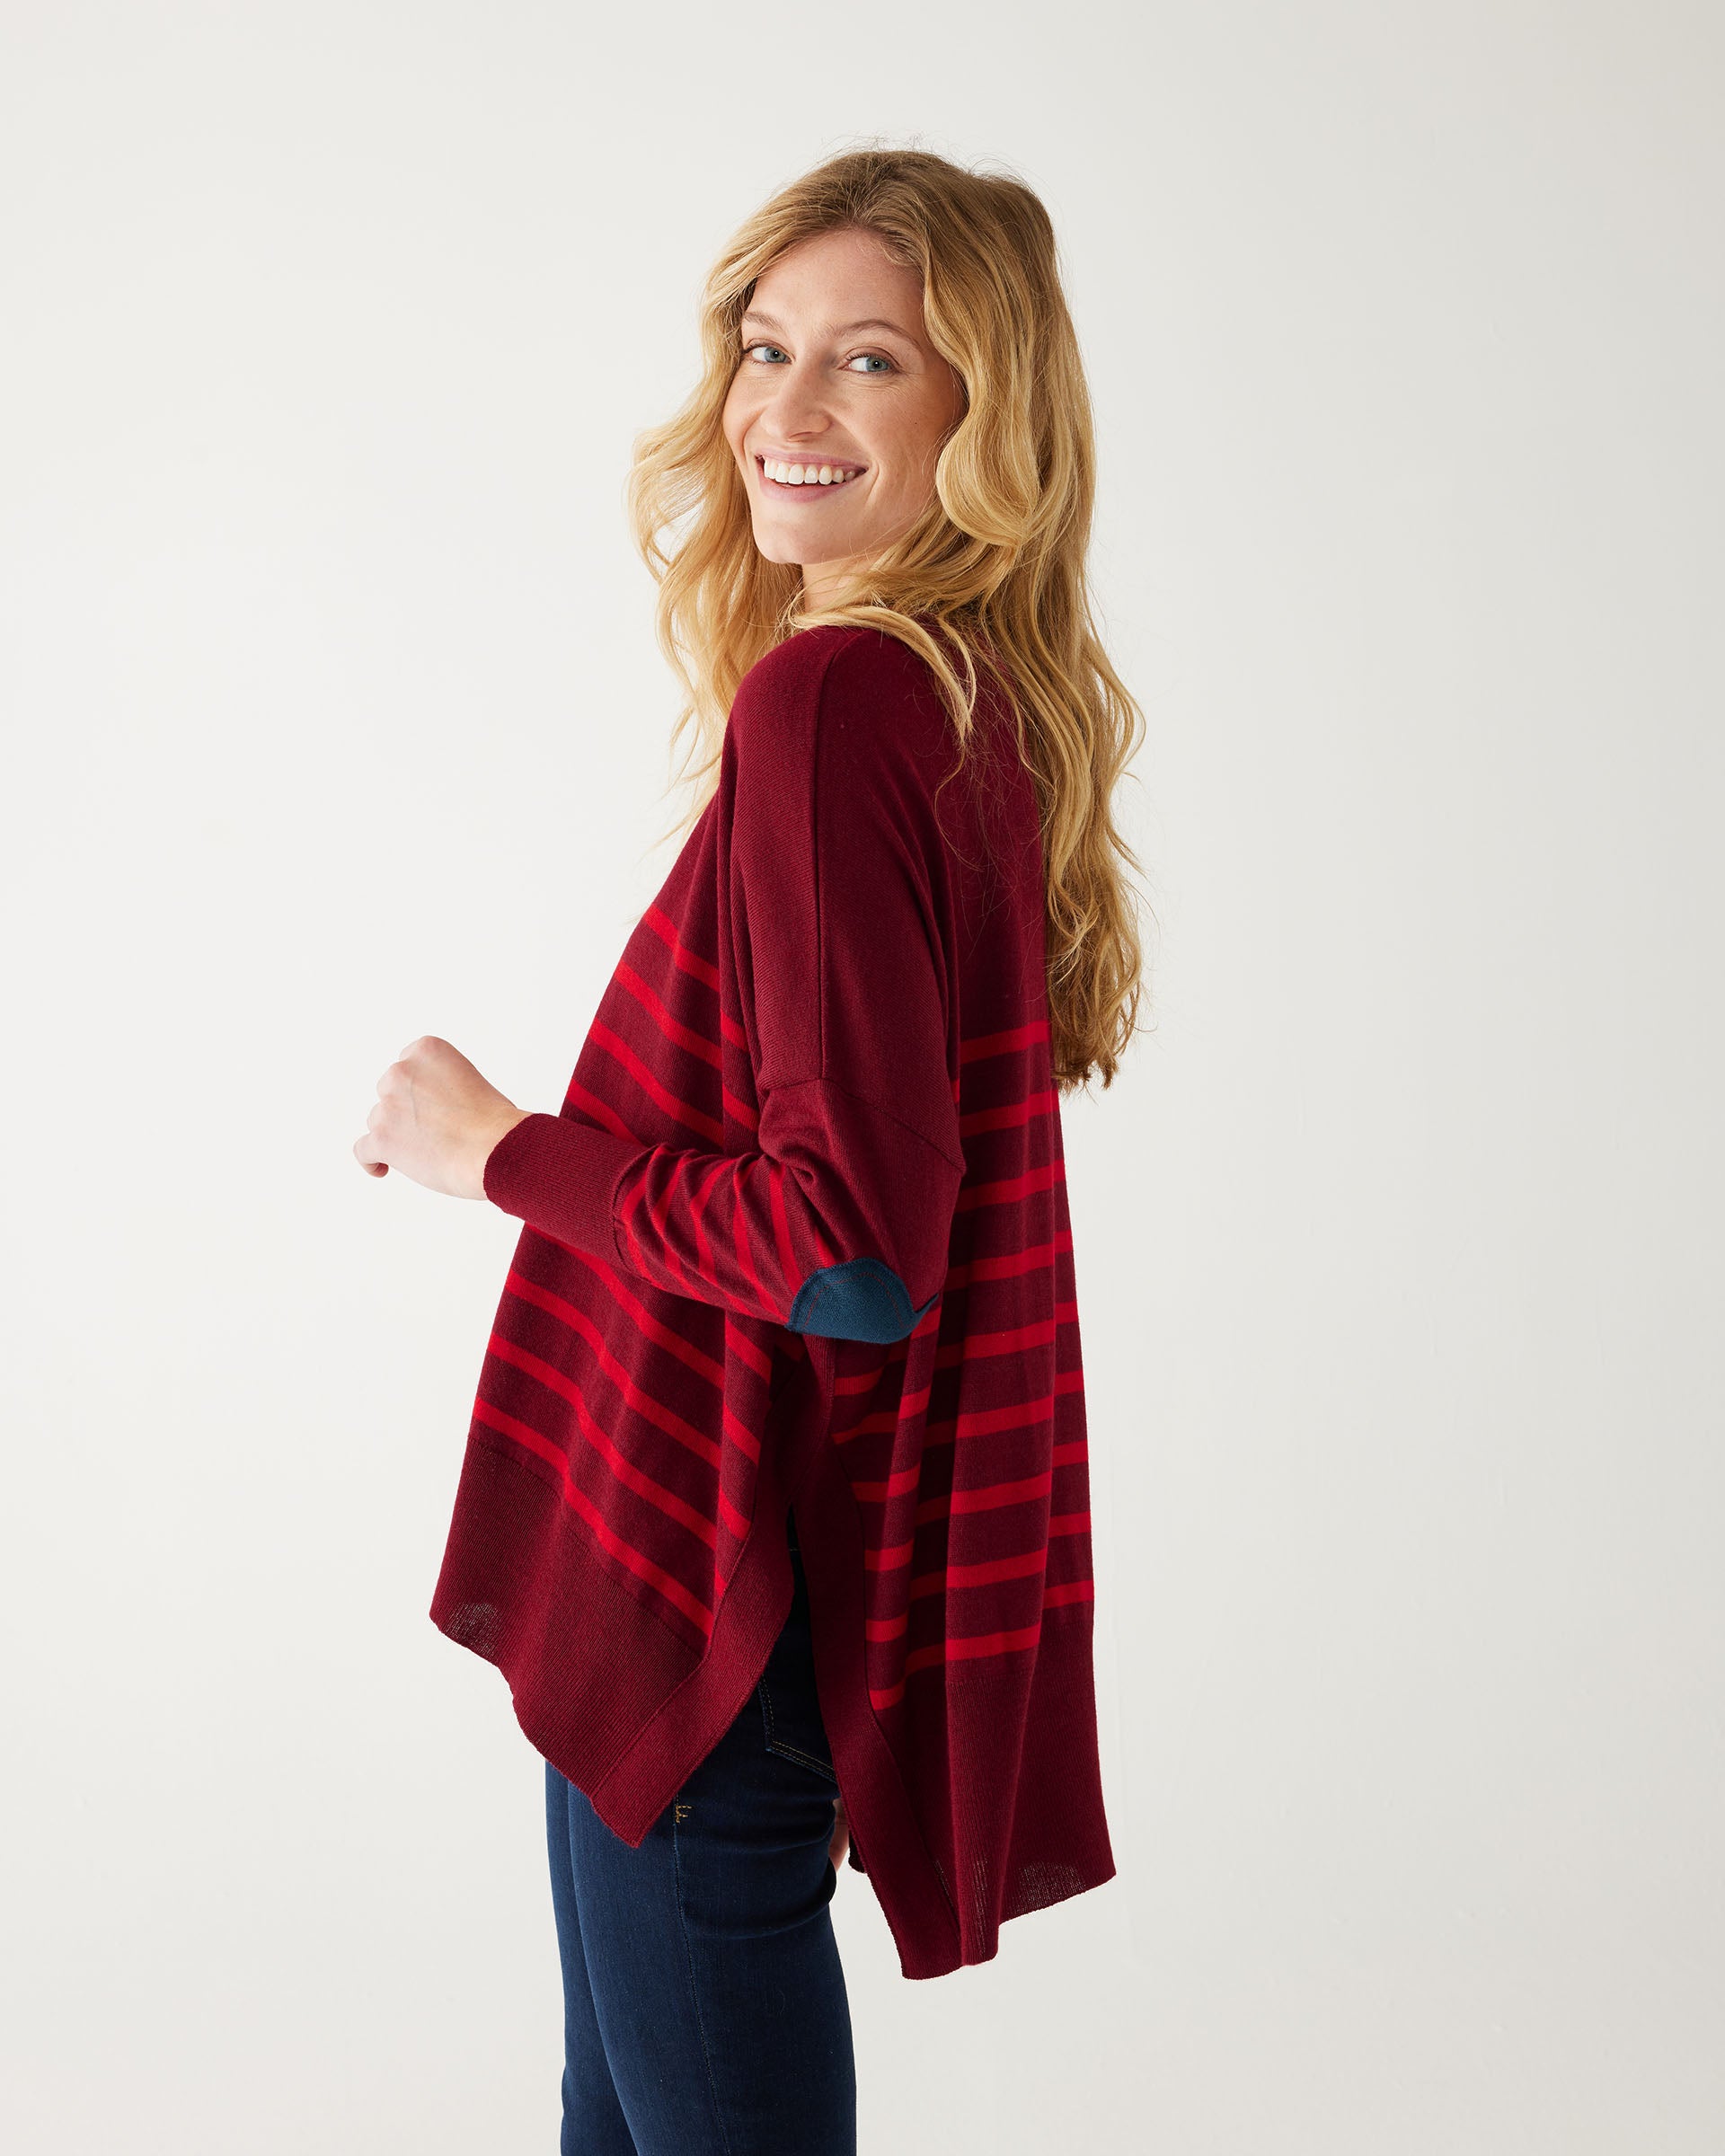 maroon sweater with red stripes and a navy heart elbow patch sideways on white background